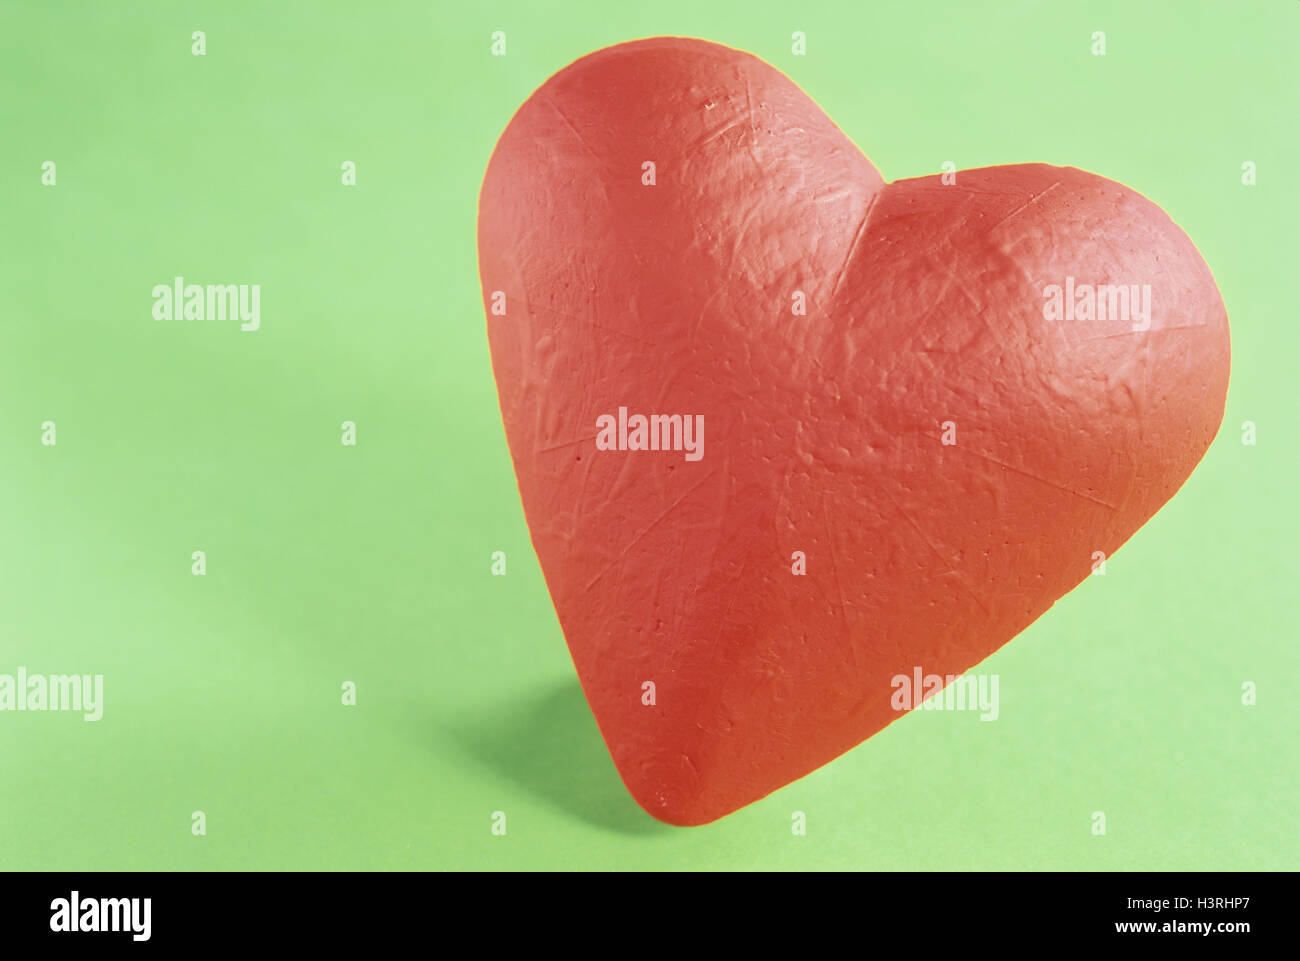 Heart, red, plastic, Kuststoff, icon, love, falls in love, present, decoration, Still life, Mother's Day, Valentinstag, cut out Stock Photo